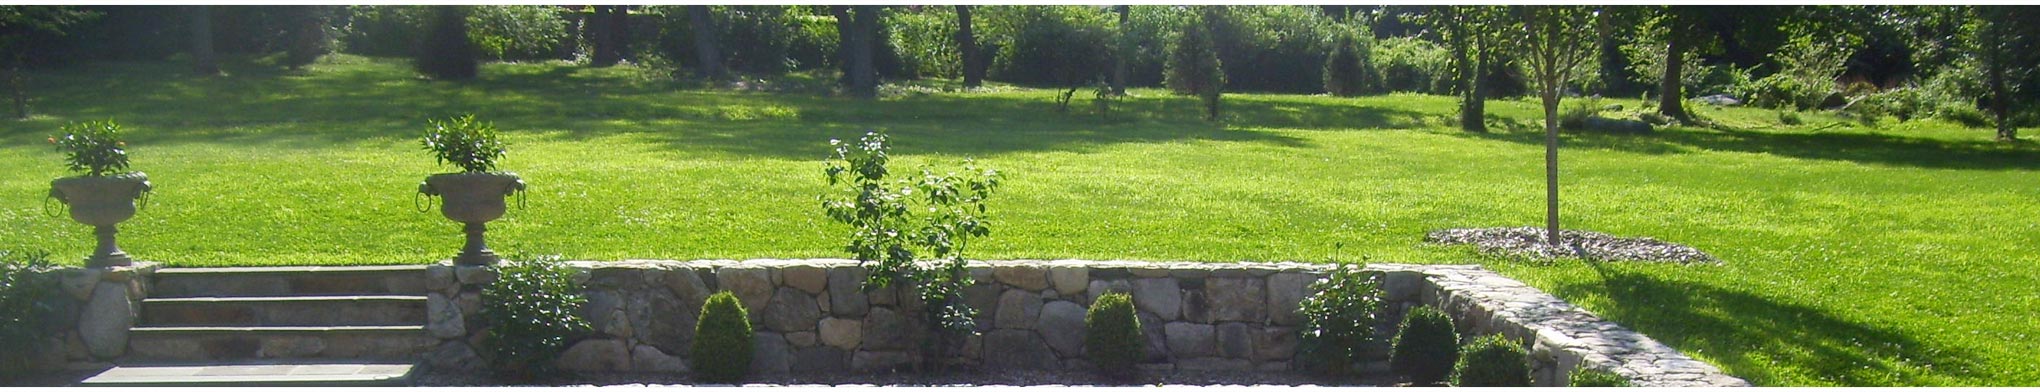 Carvalho S First Class Landscaping In, Landscaping Danbury Ct